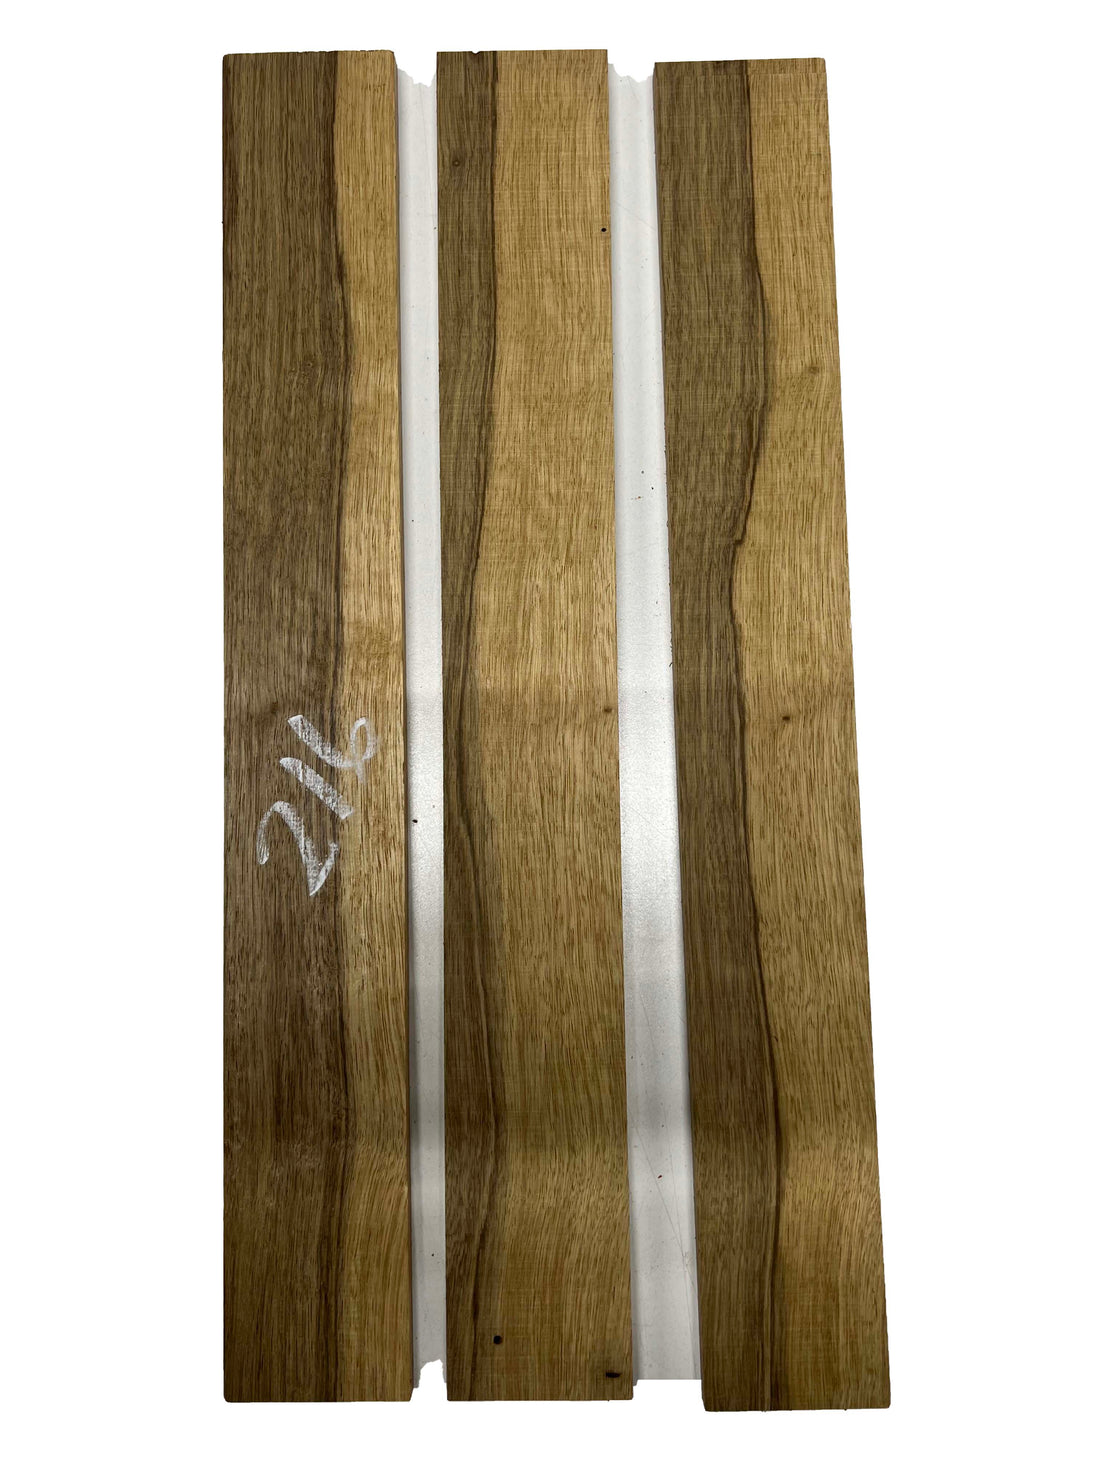 Pack Of 3, Black Limba Guitar Fingerboard Blank 21&quot;x2-7/8&quot;x3/8&quot; 